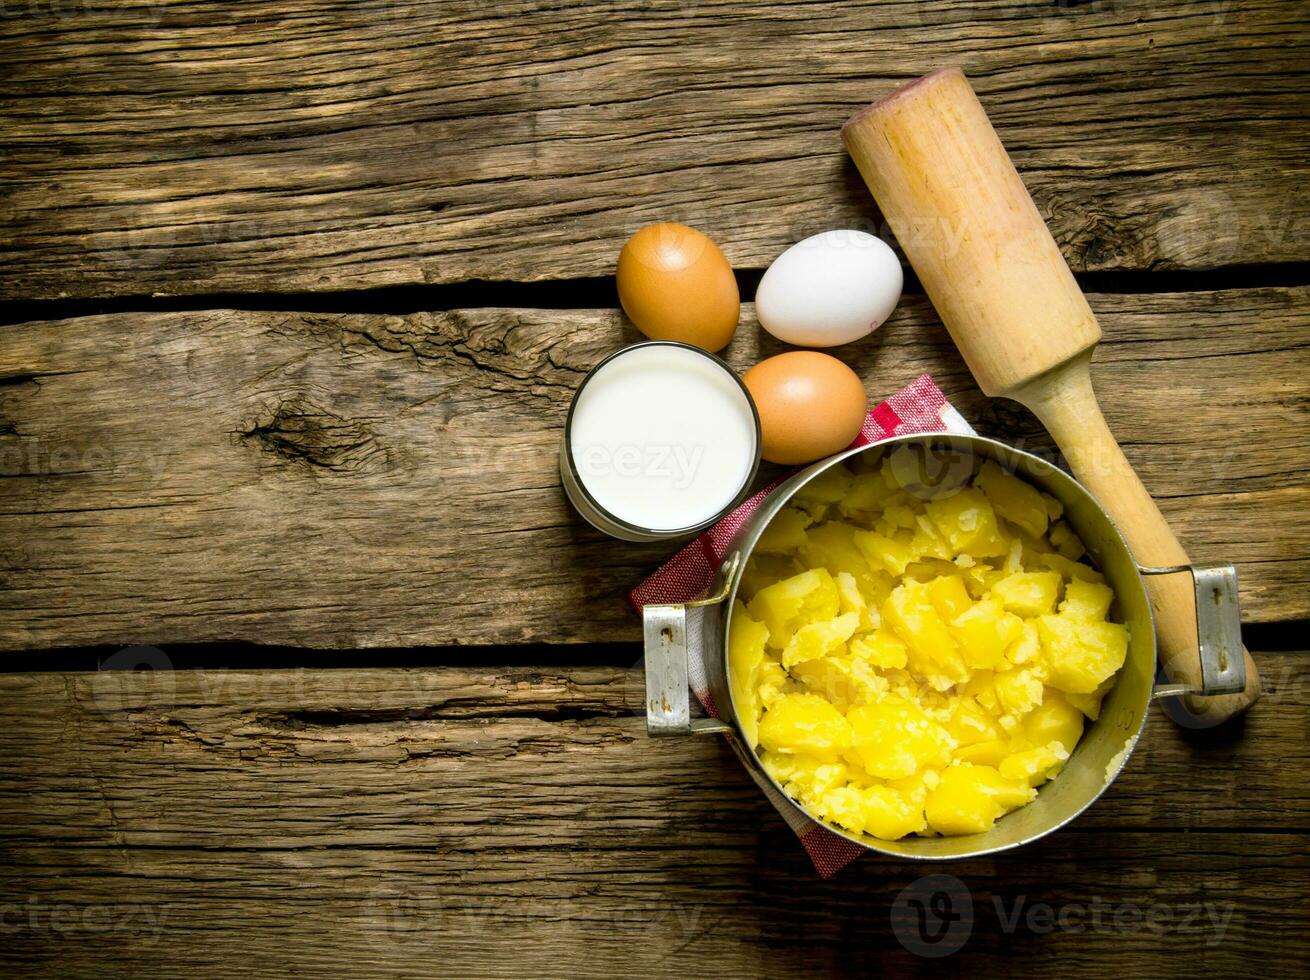 Ingredients for mashed potatoes - eggs, milk, butter and potatoes on wooden background. Free space for text. photo